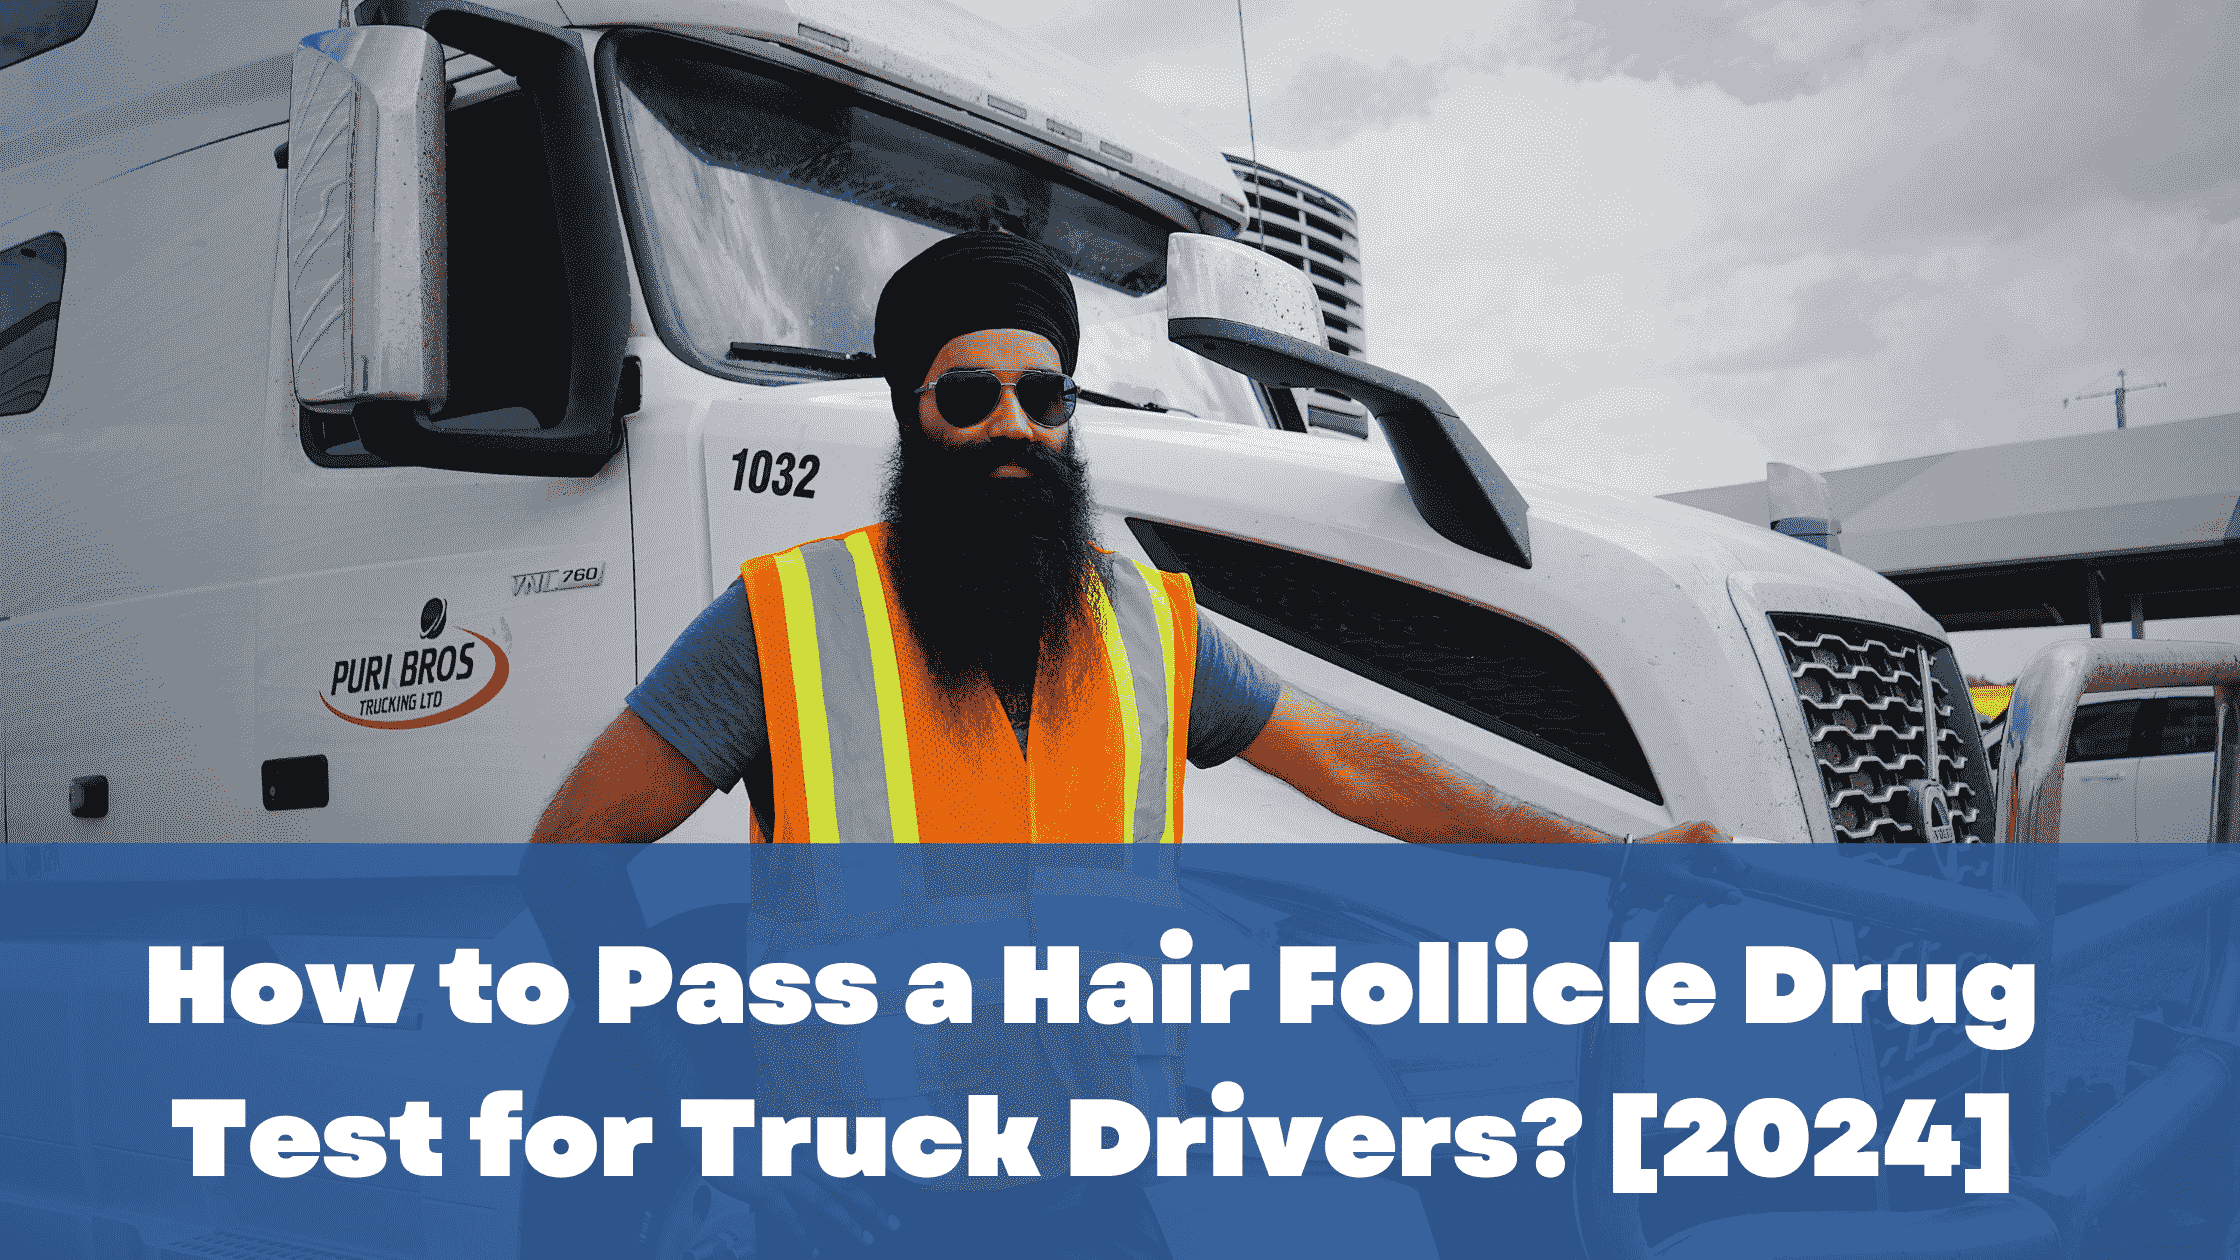 How to Pass a Hair Follicle Drug Test for Truck Drivers? [2024]